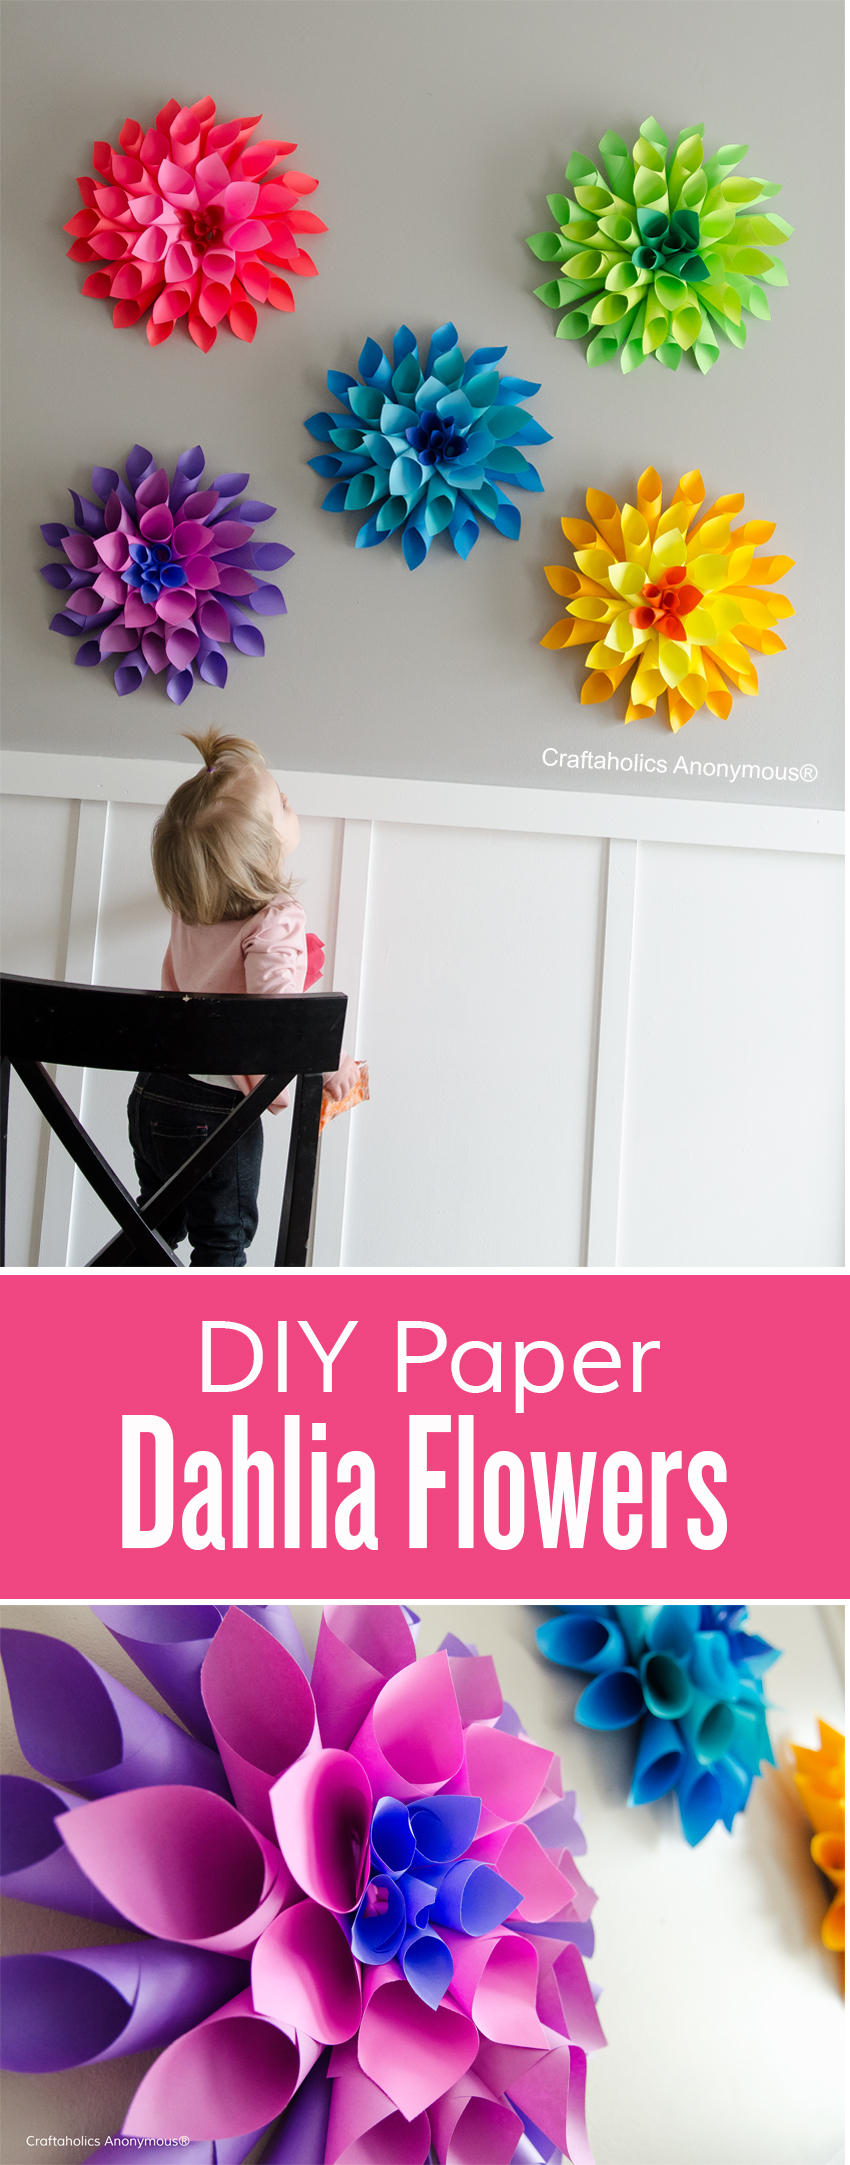 Learn how to make Paper Dahlia flowers || Love the rainbow of colors! Perfect for Spring or Easter.